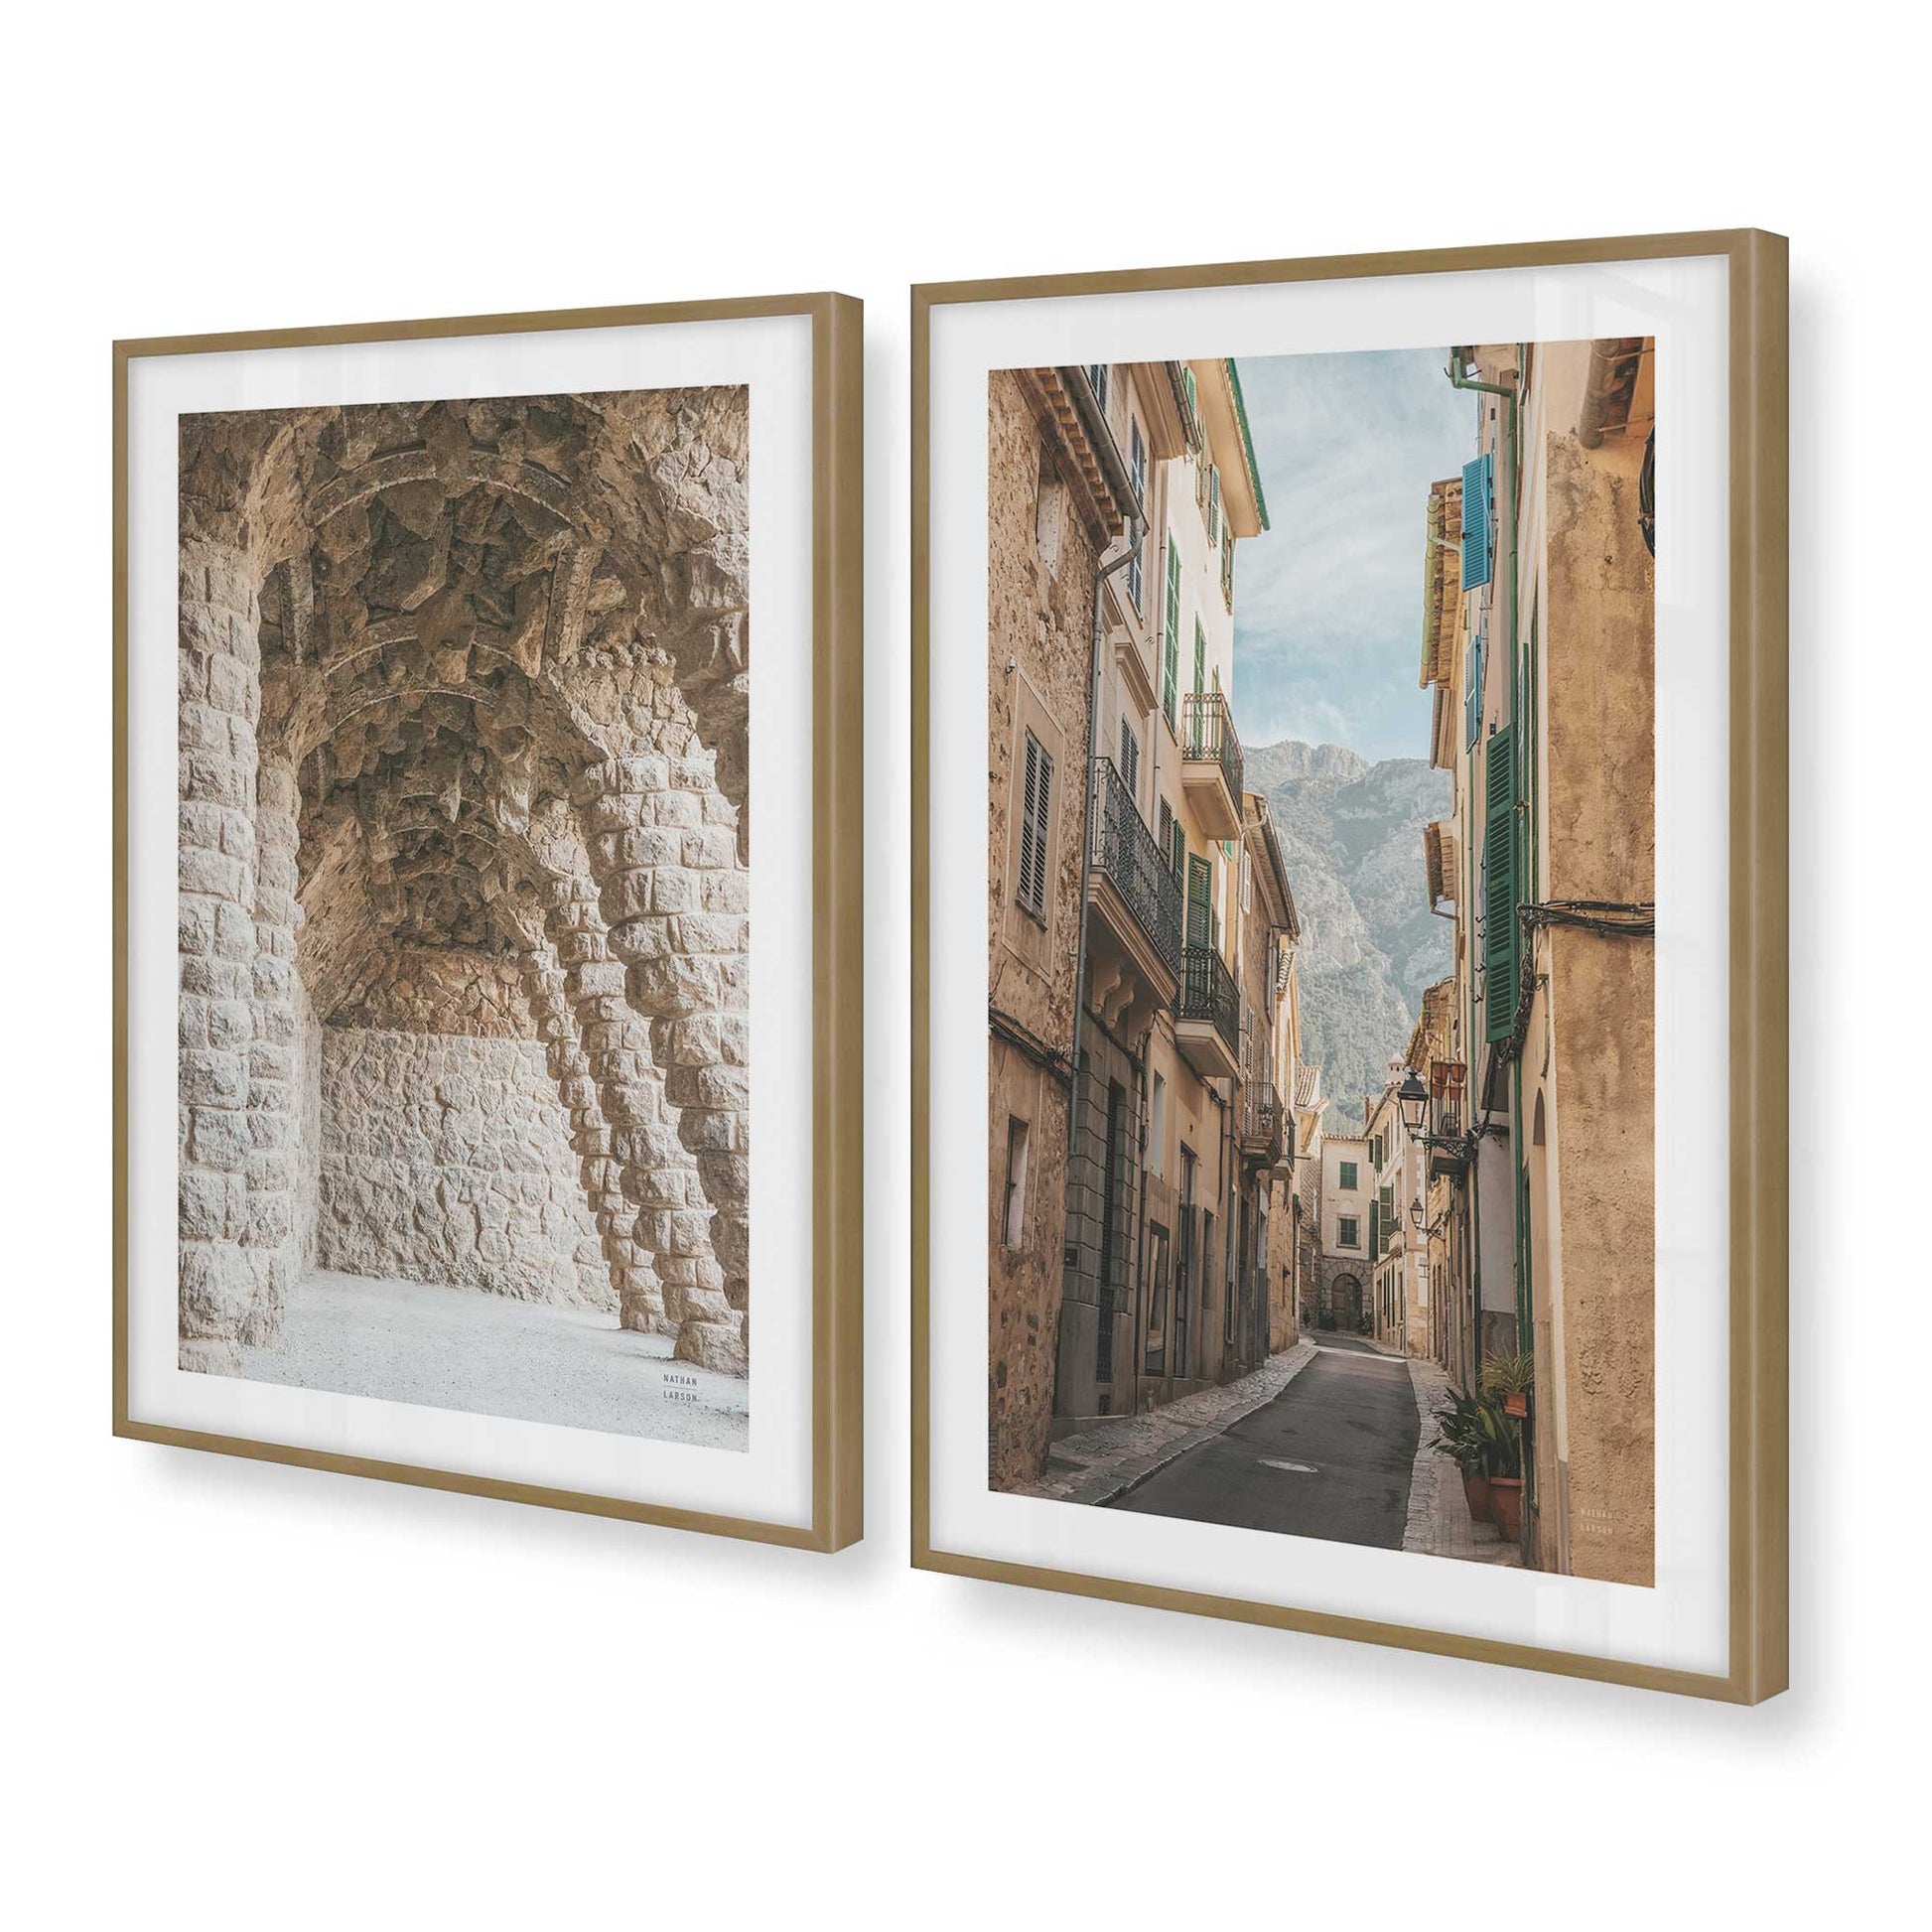 [Color:Brushed Gold] Picture of art in a Brushed Gold frame at an angle